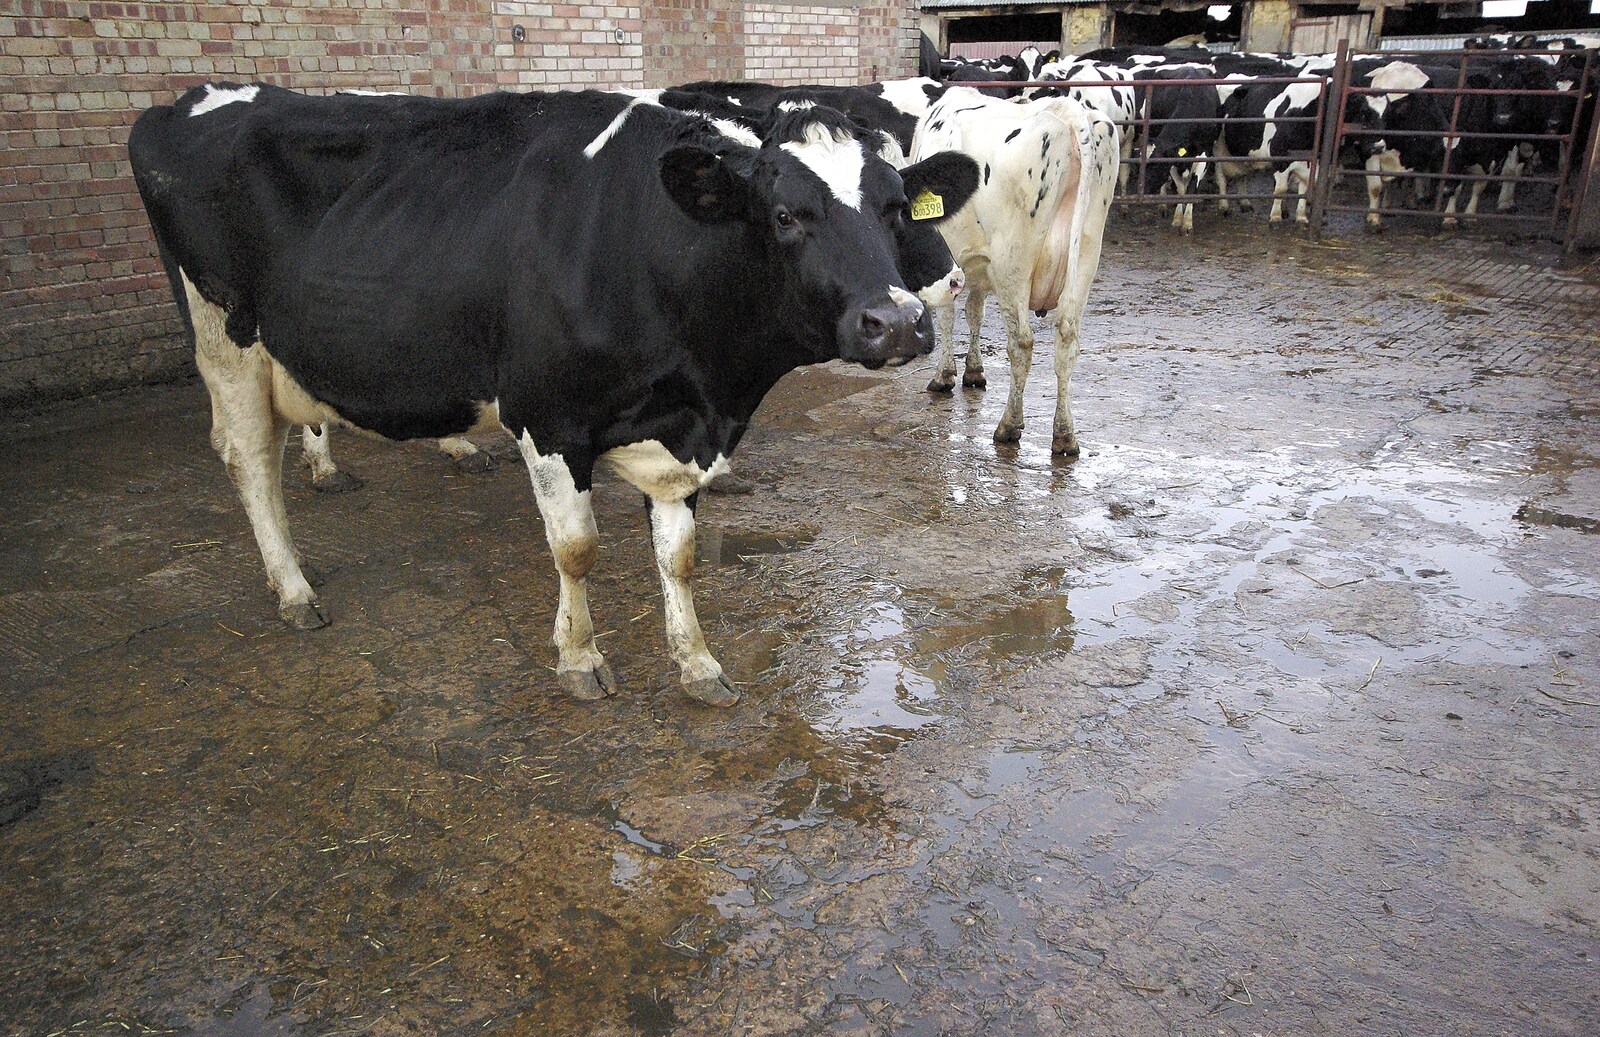 A cow stands around from The Last Milking at Dairy Farm, Thrandeston, Suffolk - 11th January 2007